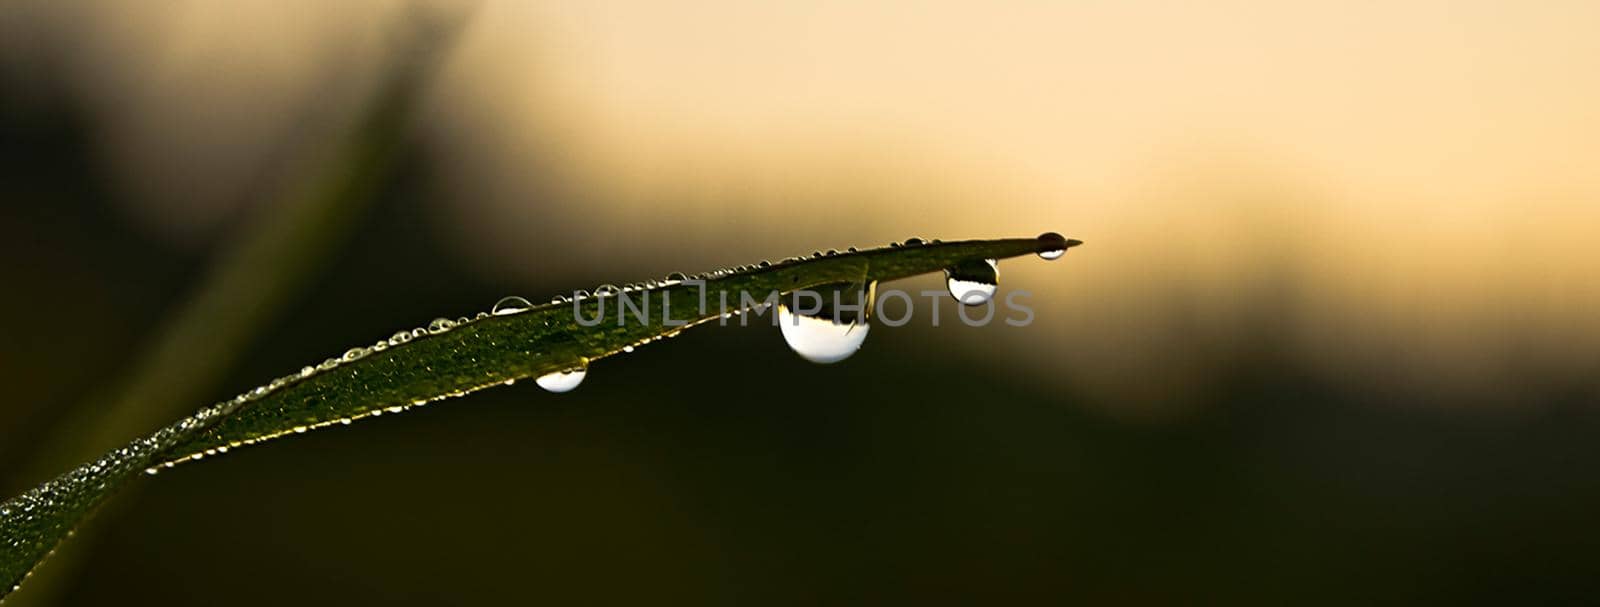 Drops of water on leaves of grass. Dew on green grass. by DePo